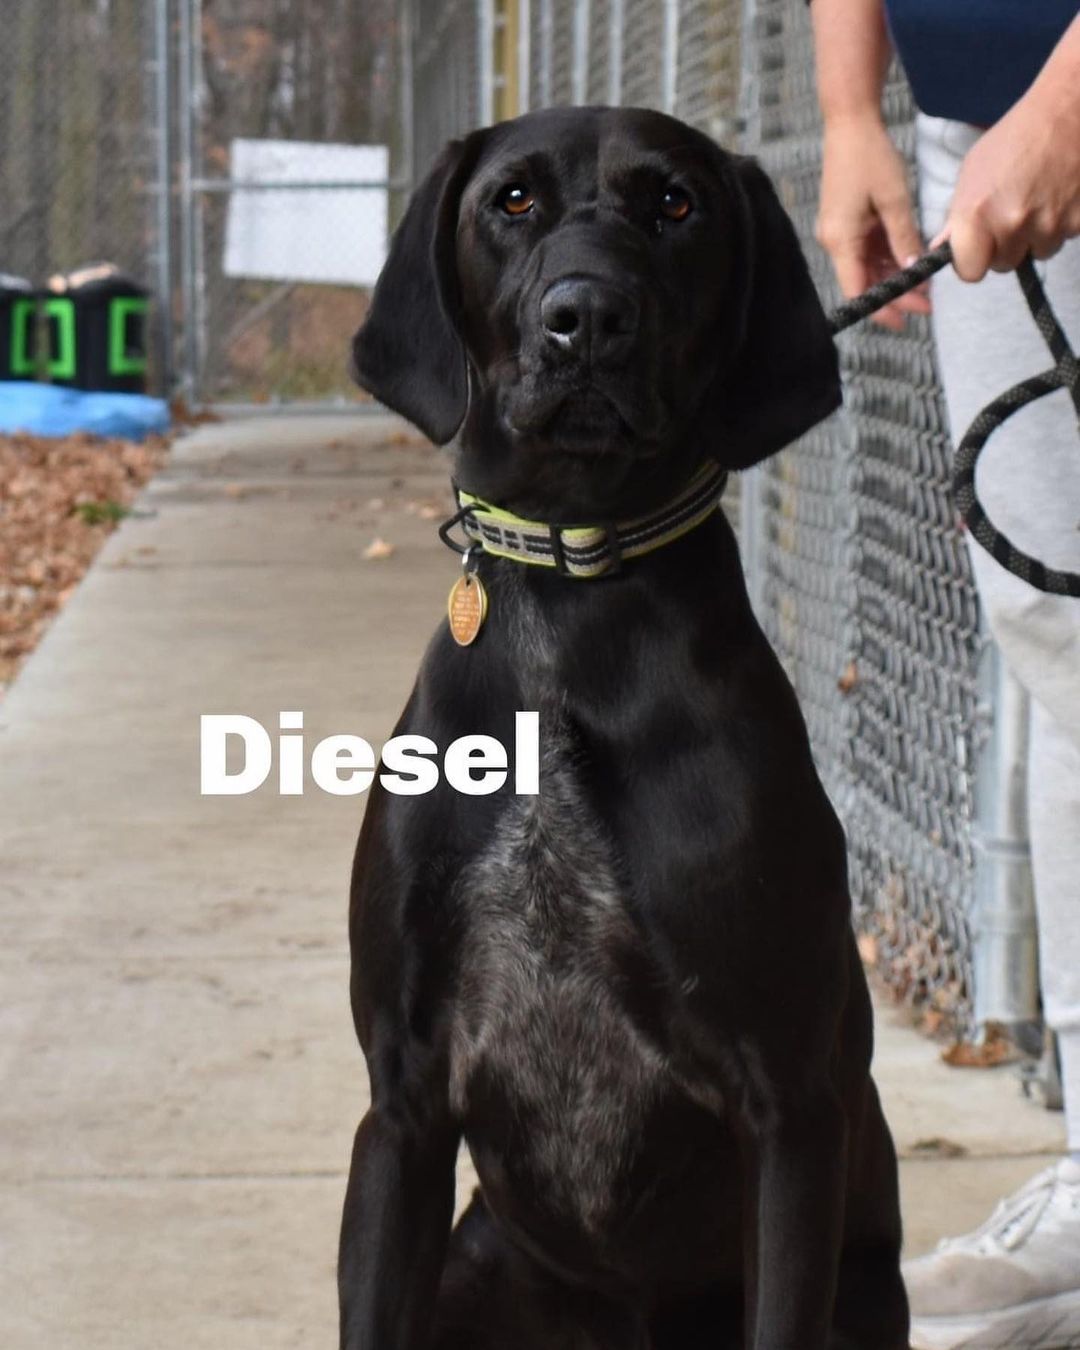 Hi my name is Diesel. I am an 1 year old hound mix. I am a very social, playful boy. I love treats. I am a big love bug. If interested in adopting go to our website www.deltaanimal.org and fill out an application.